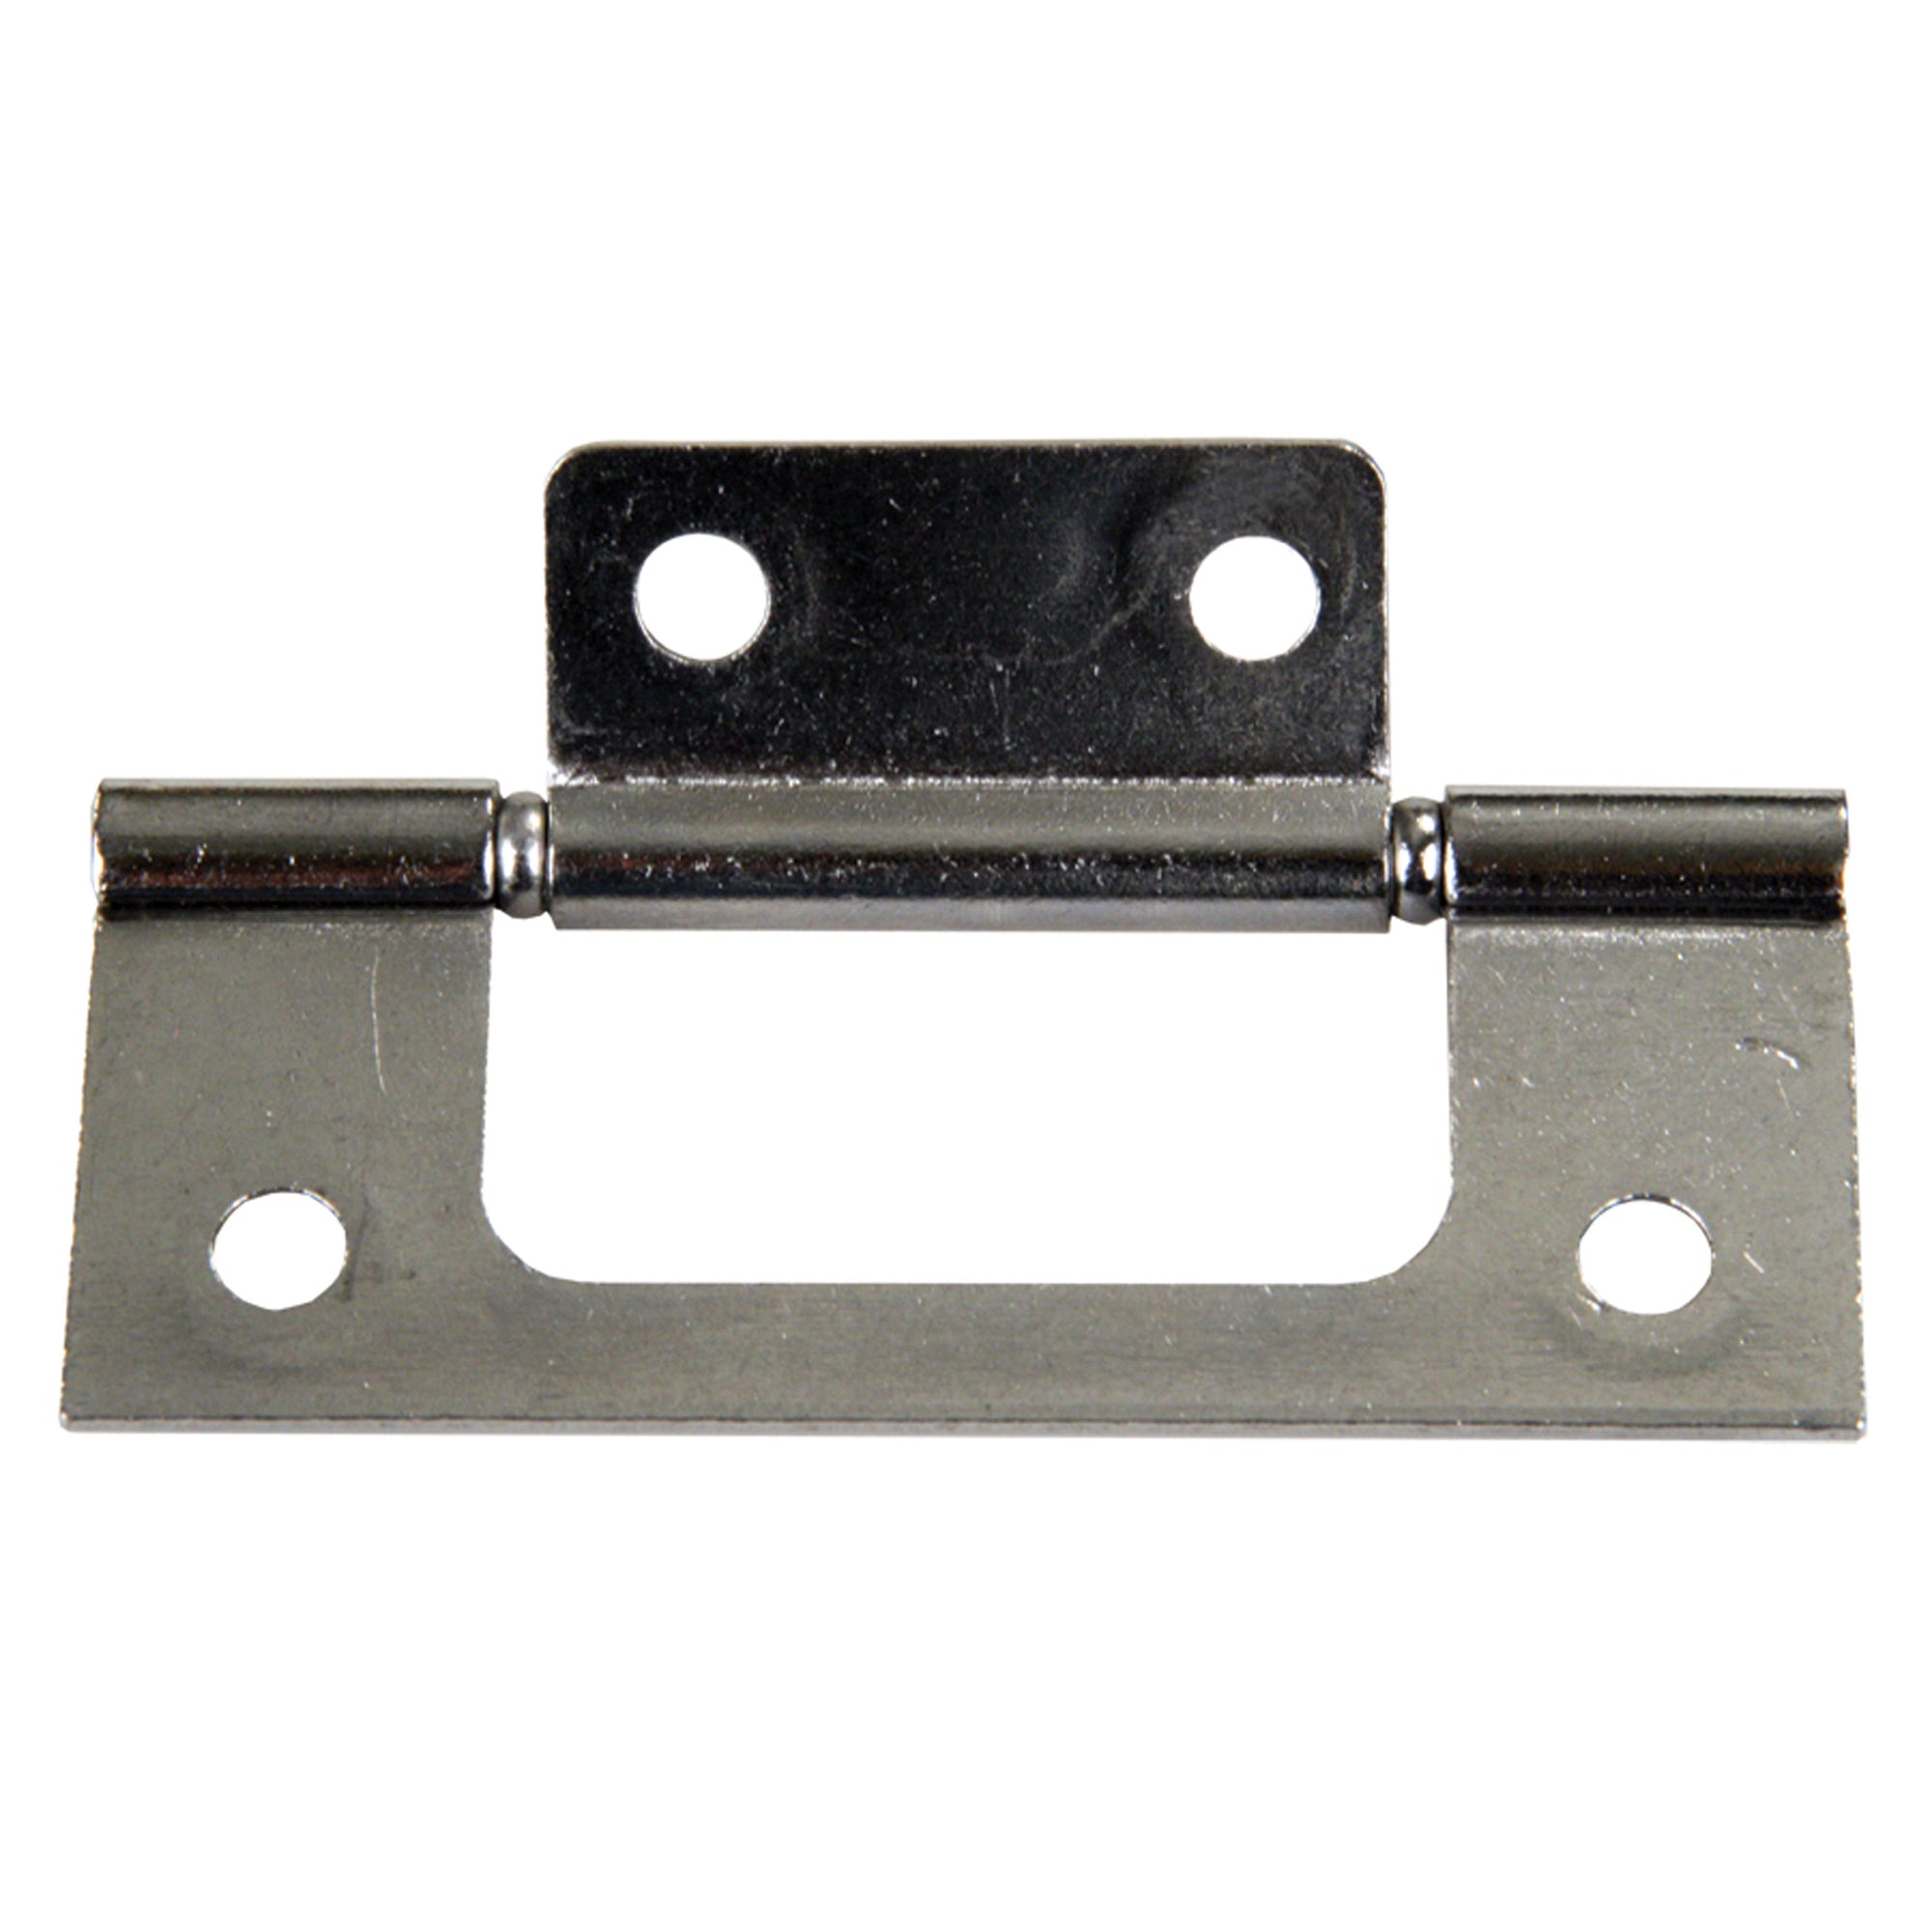 JR Products 70645 Non-Mortise Hinge - Chrome